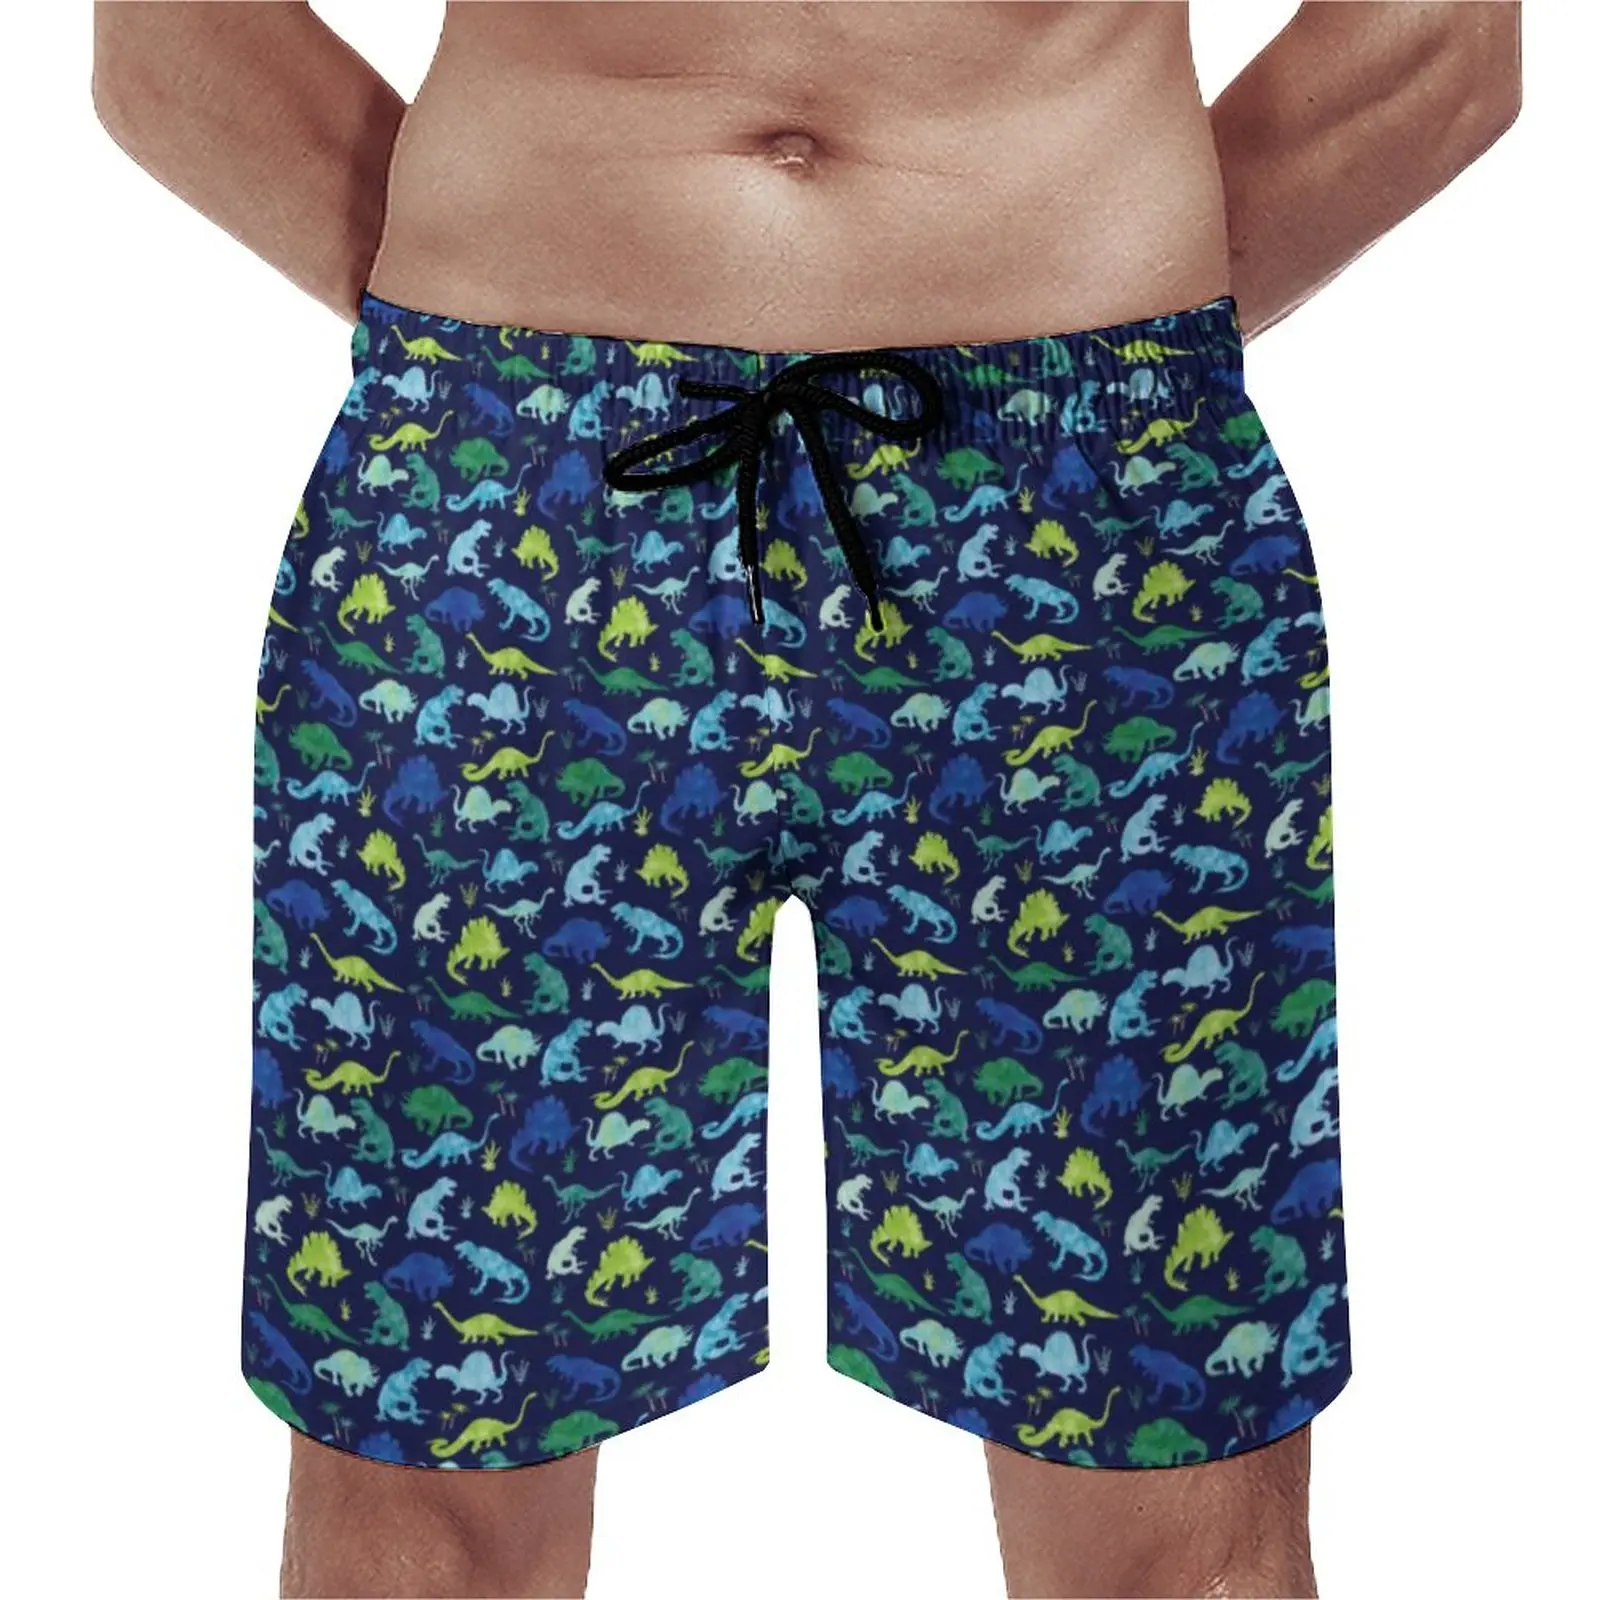 

Animal Silhouette Gym Shorts Colorful Dinosaur Vintage Beach Short Pants Male Printed Sports Surf Quick Drying Swimming Trunks